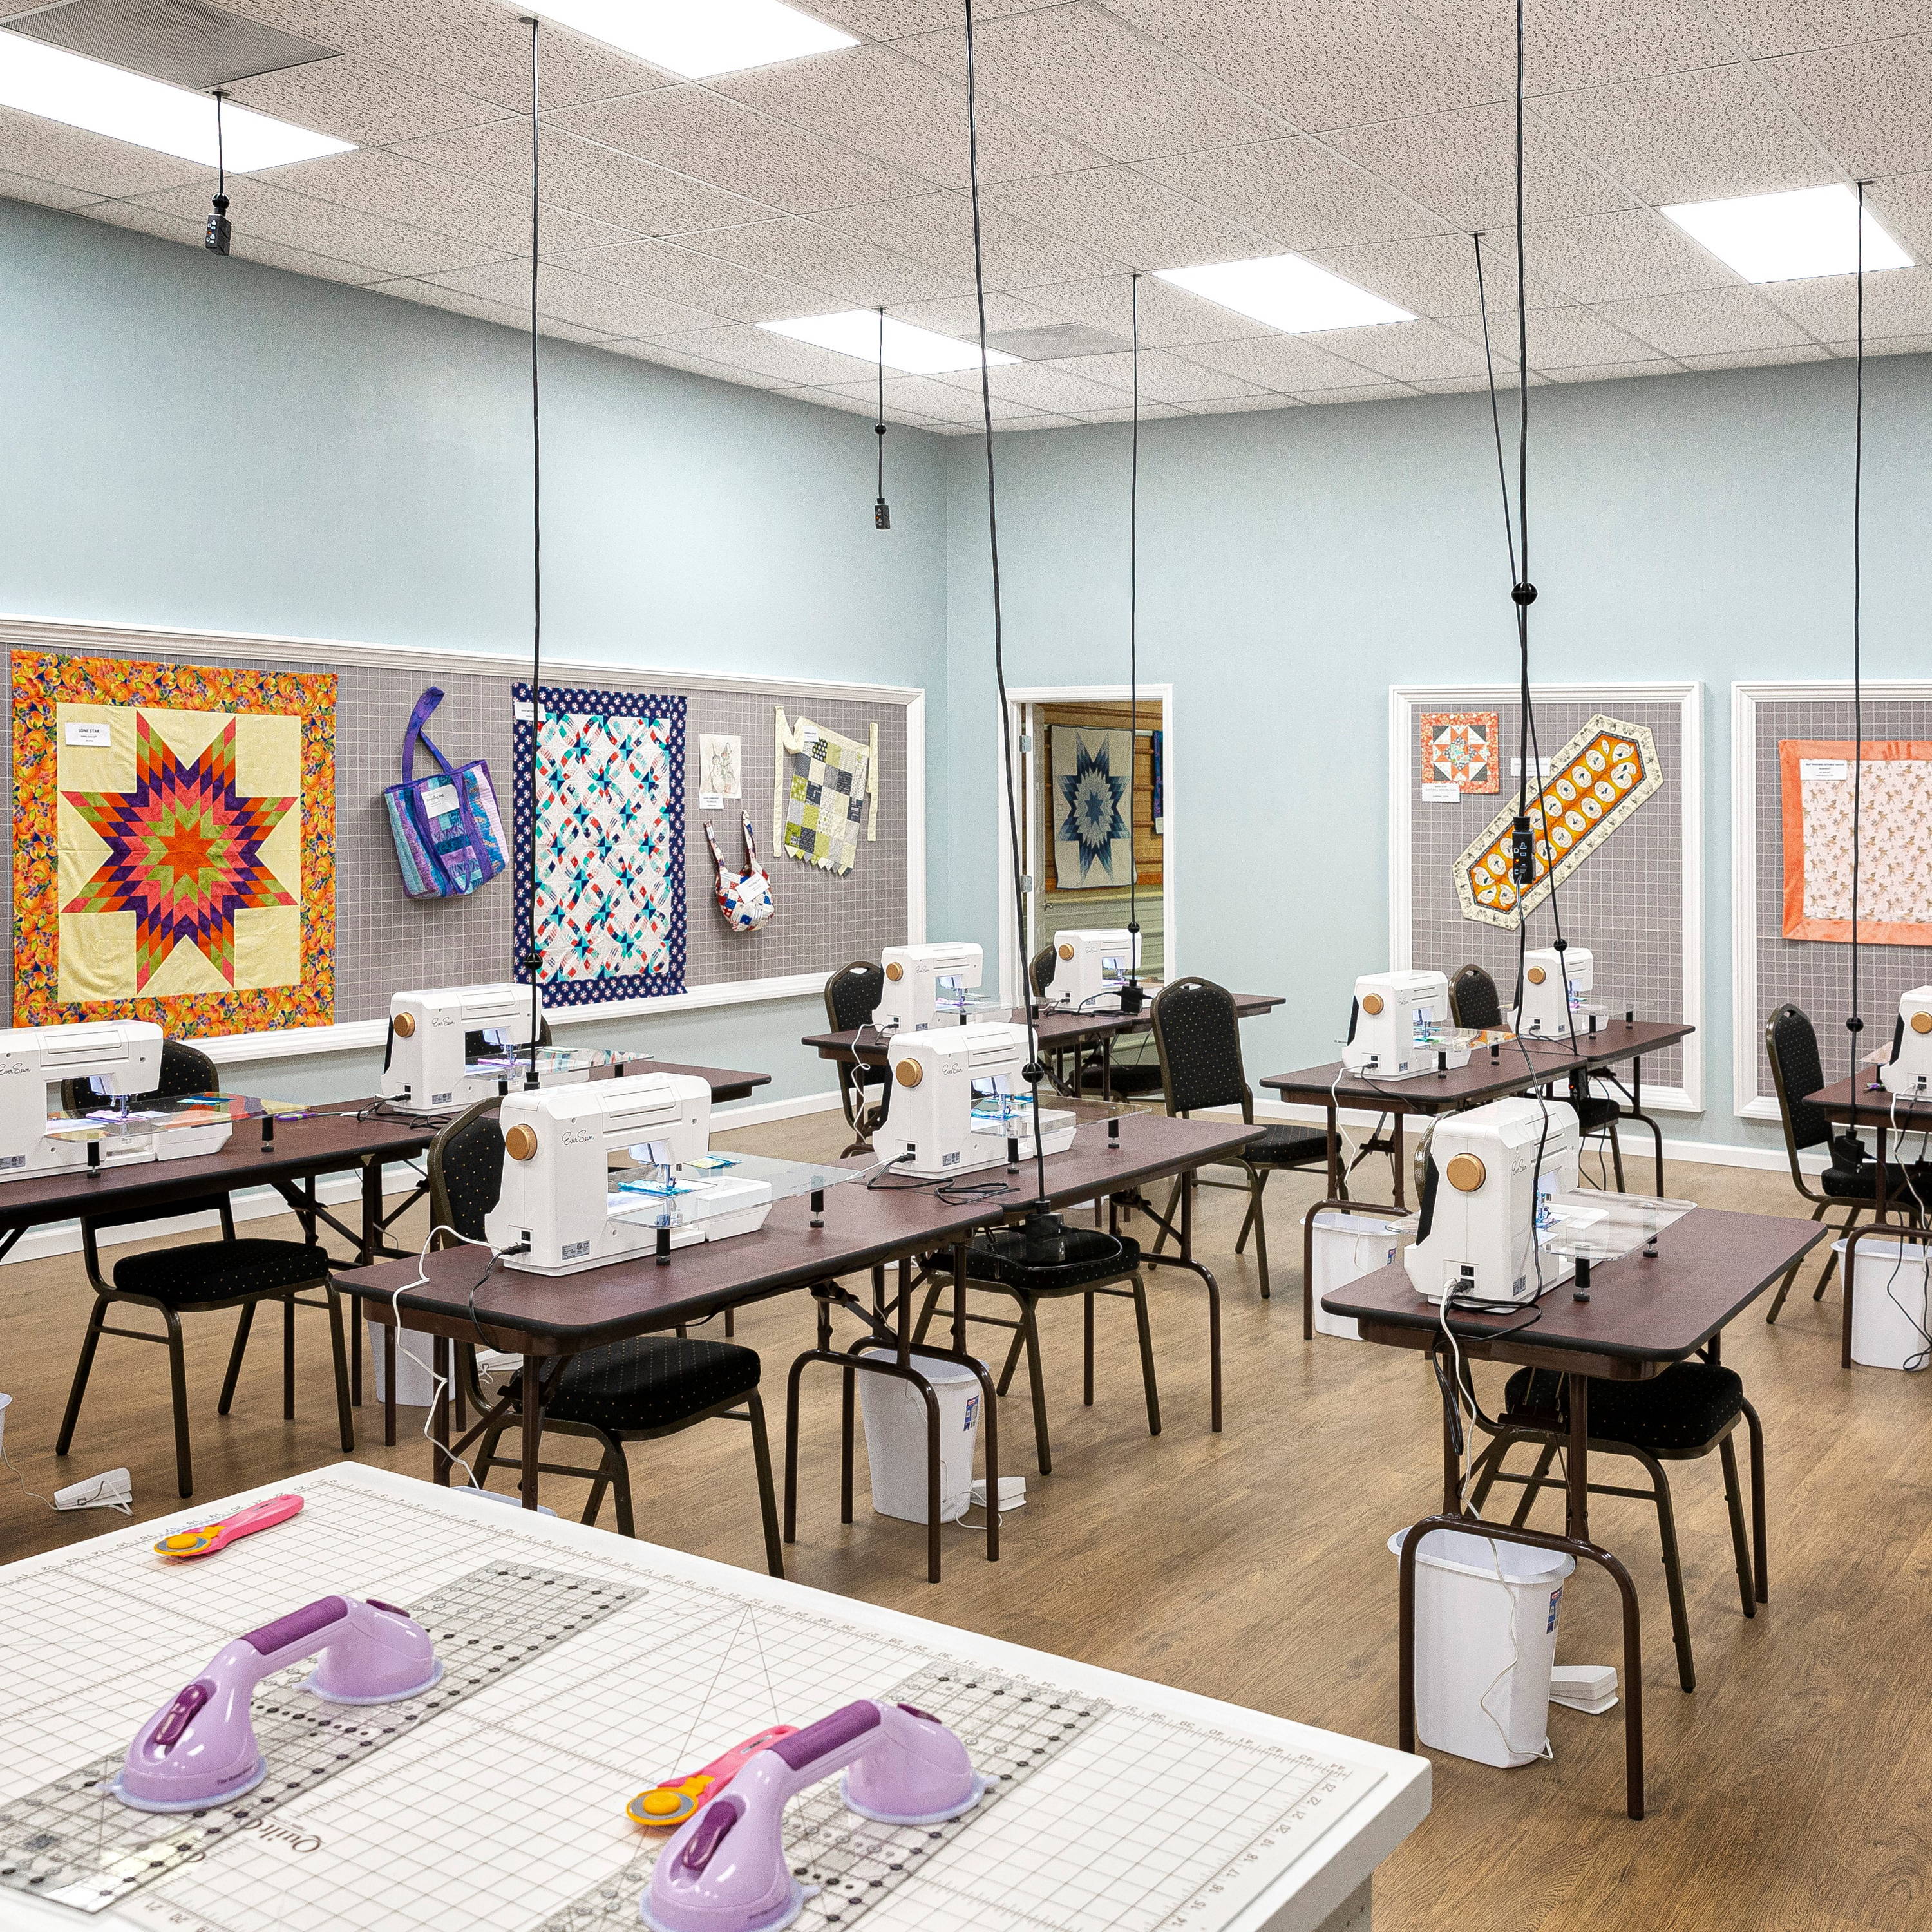 Learn to quilt at the Missouri Star education center in Hamilton, MO!